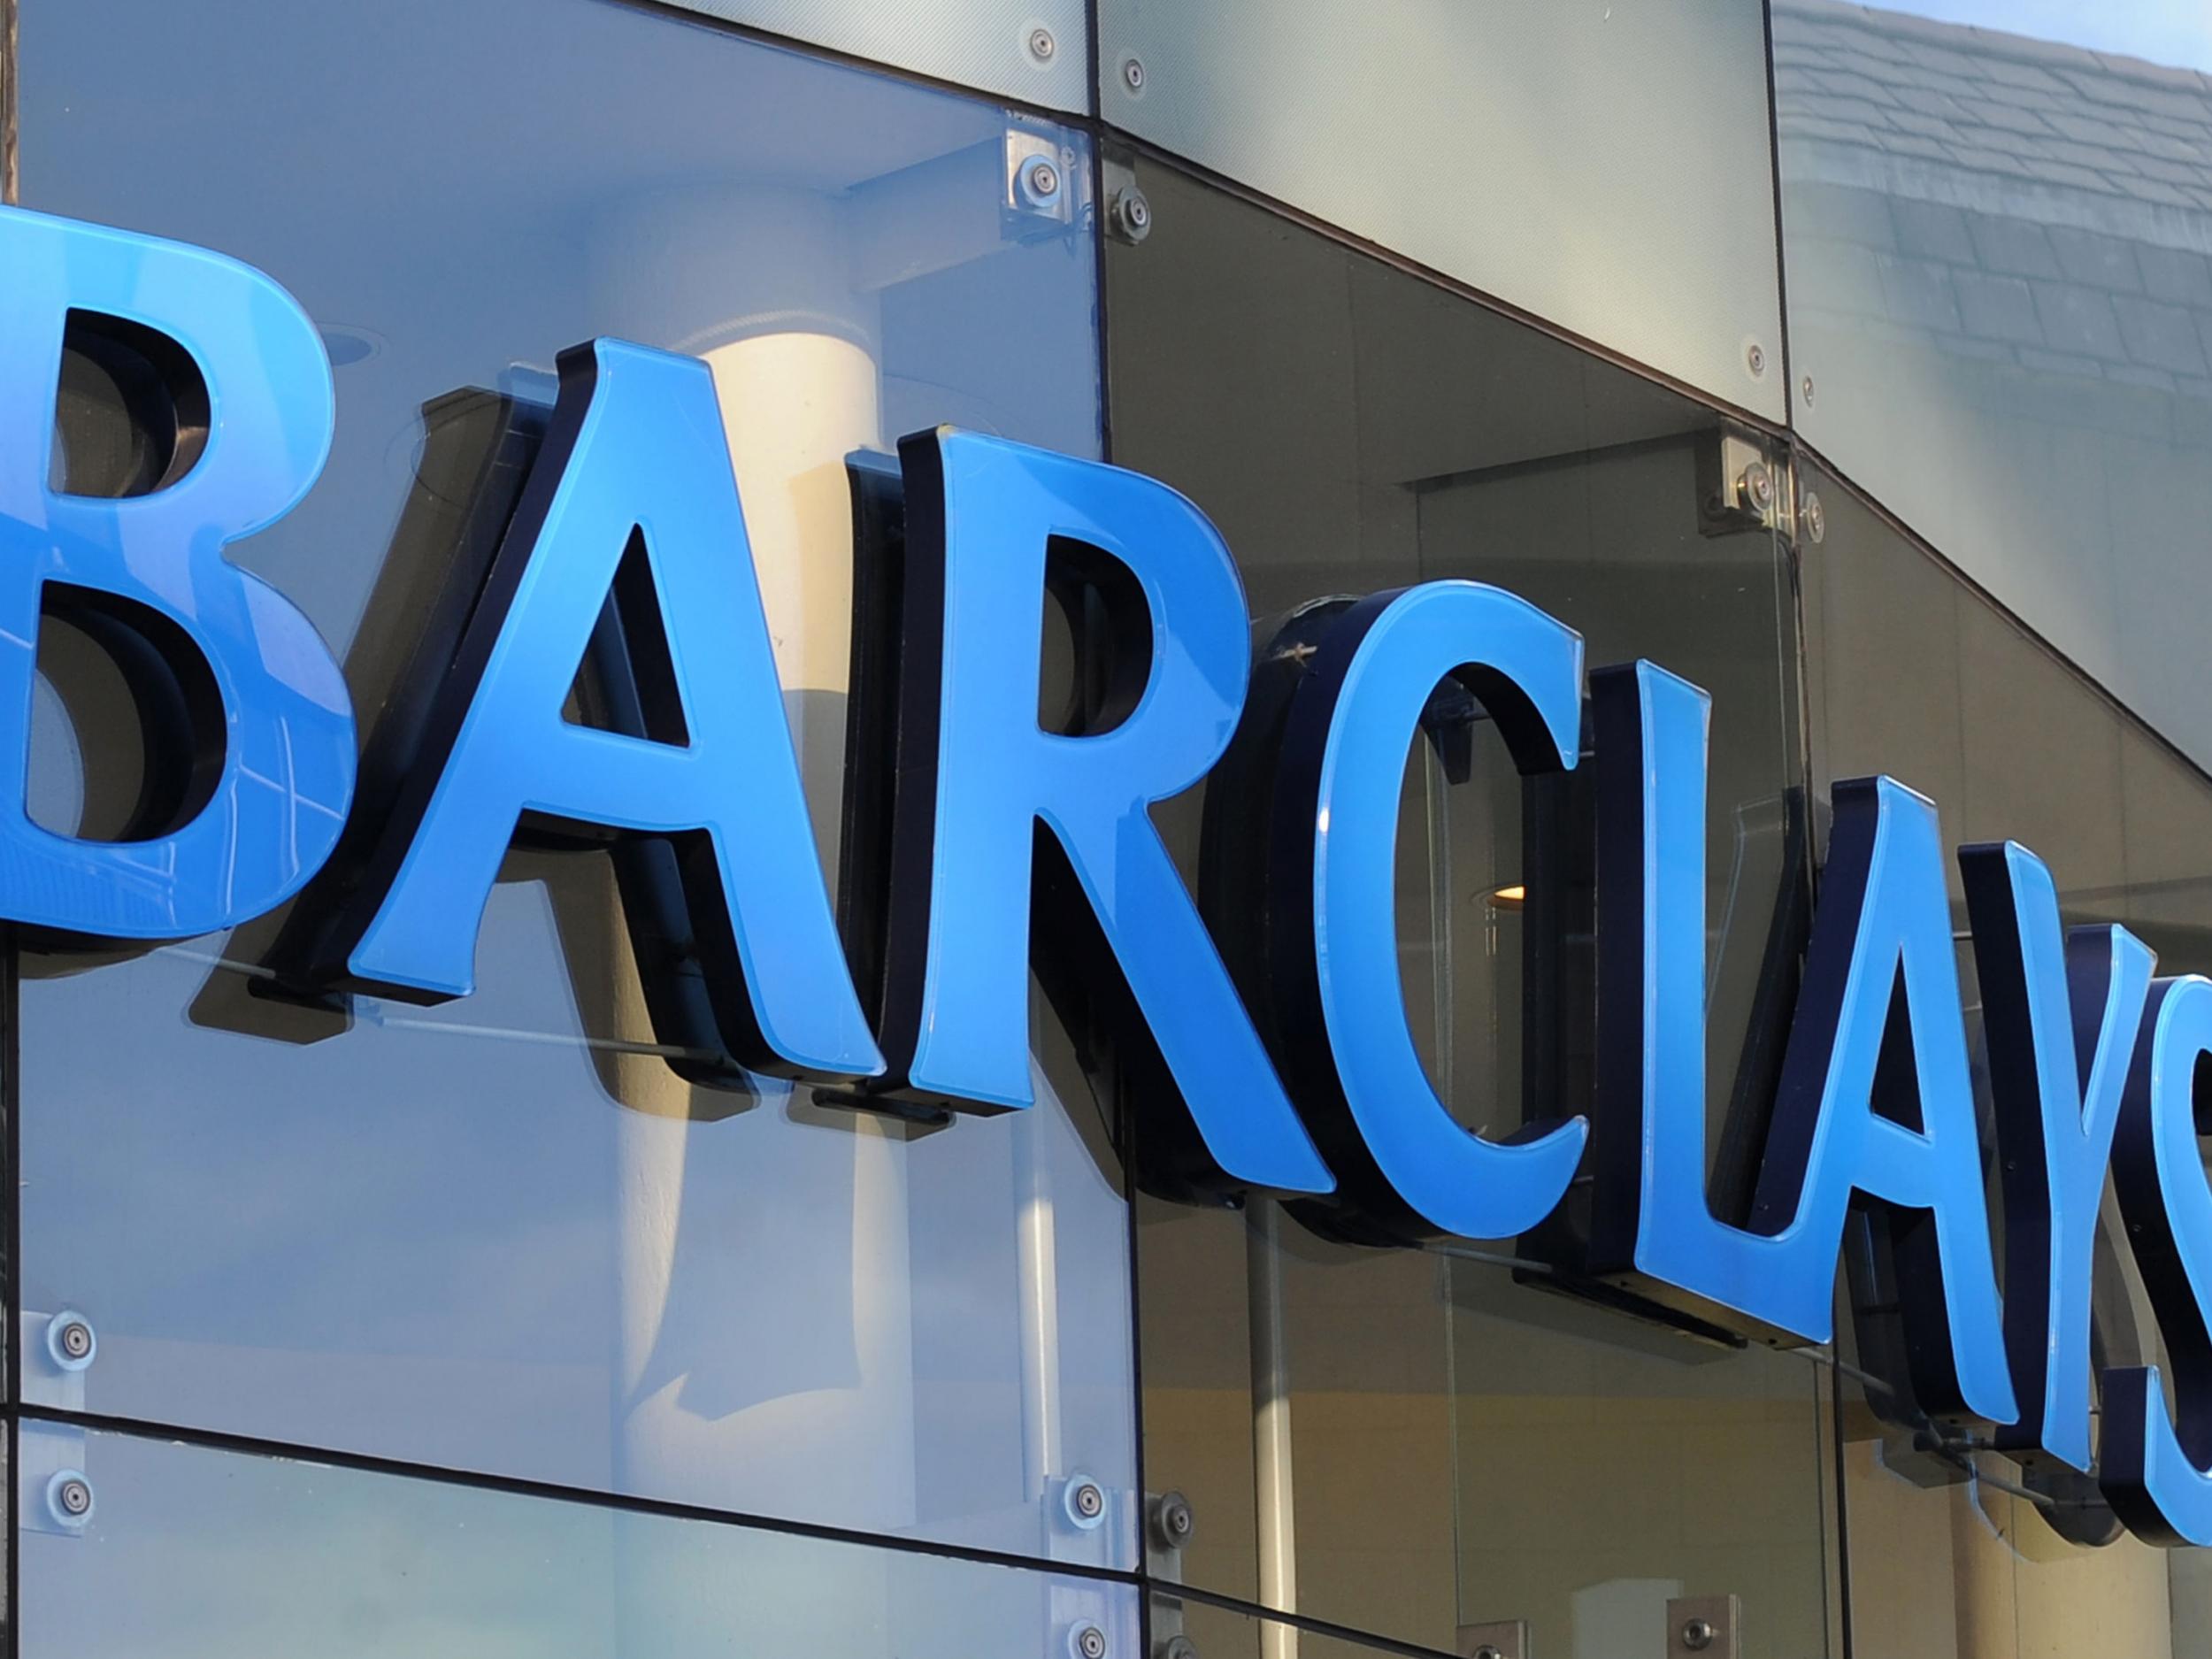 Barclays has promised to protect 100 rural branches from closure for at least two years